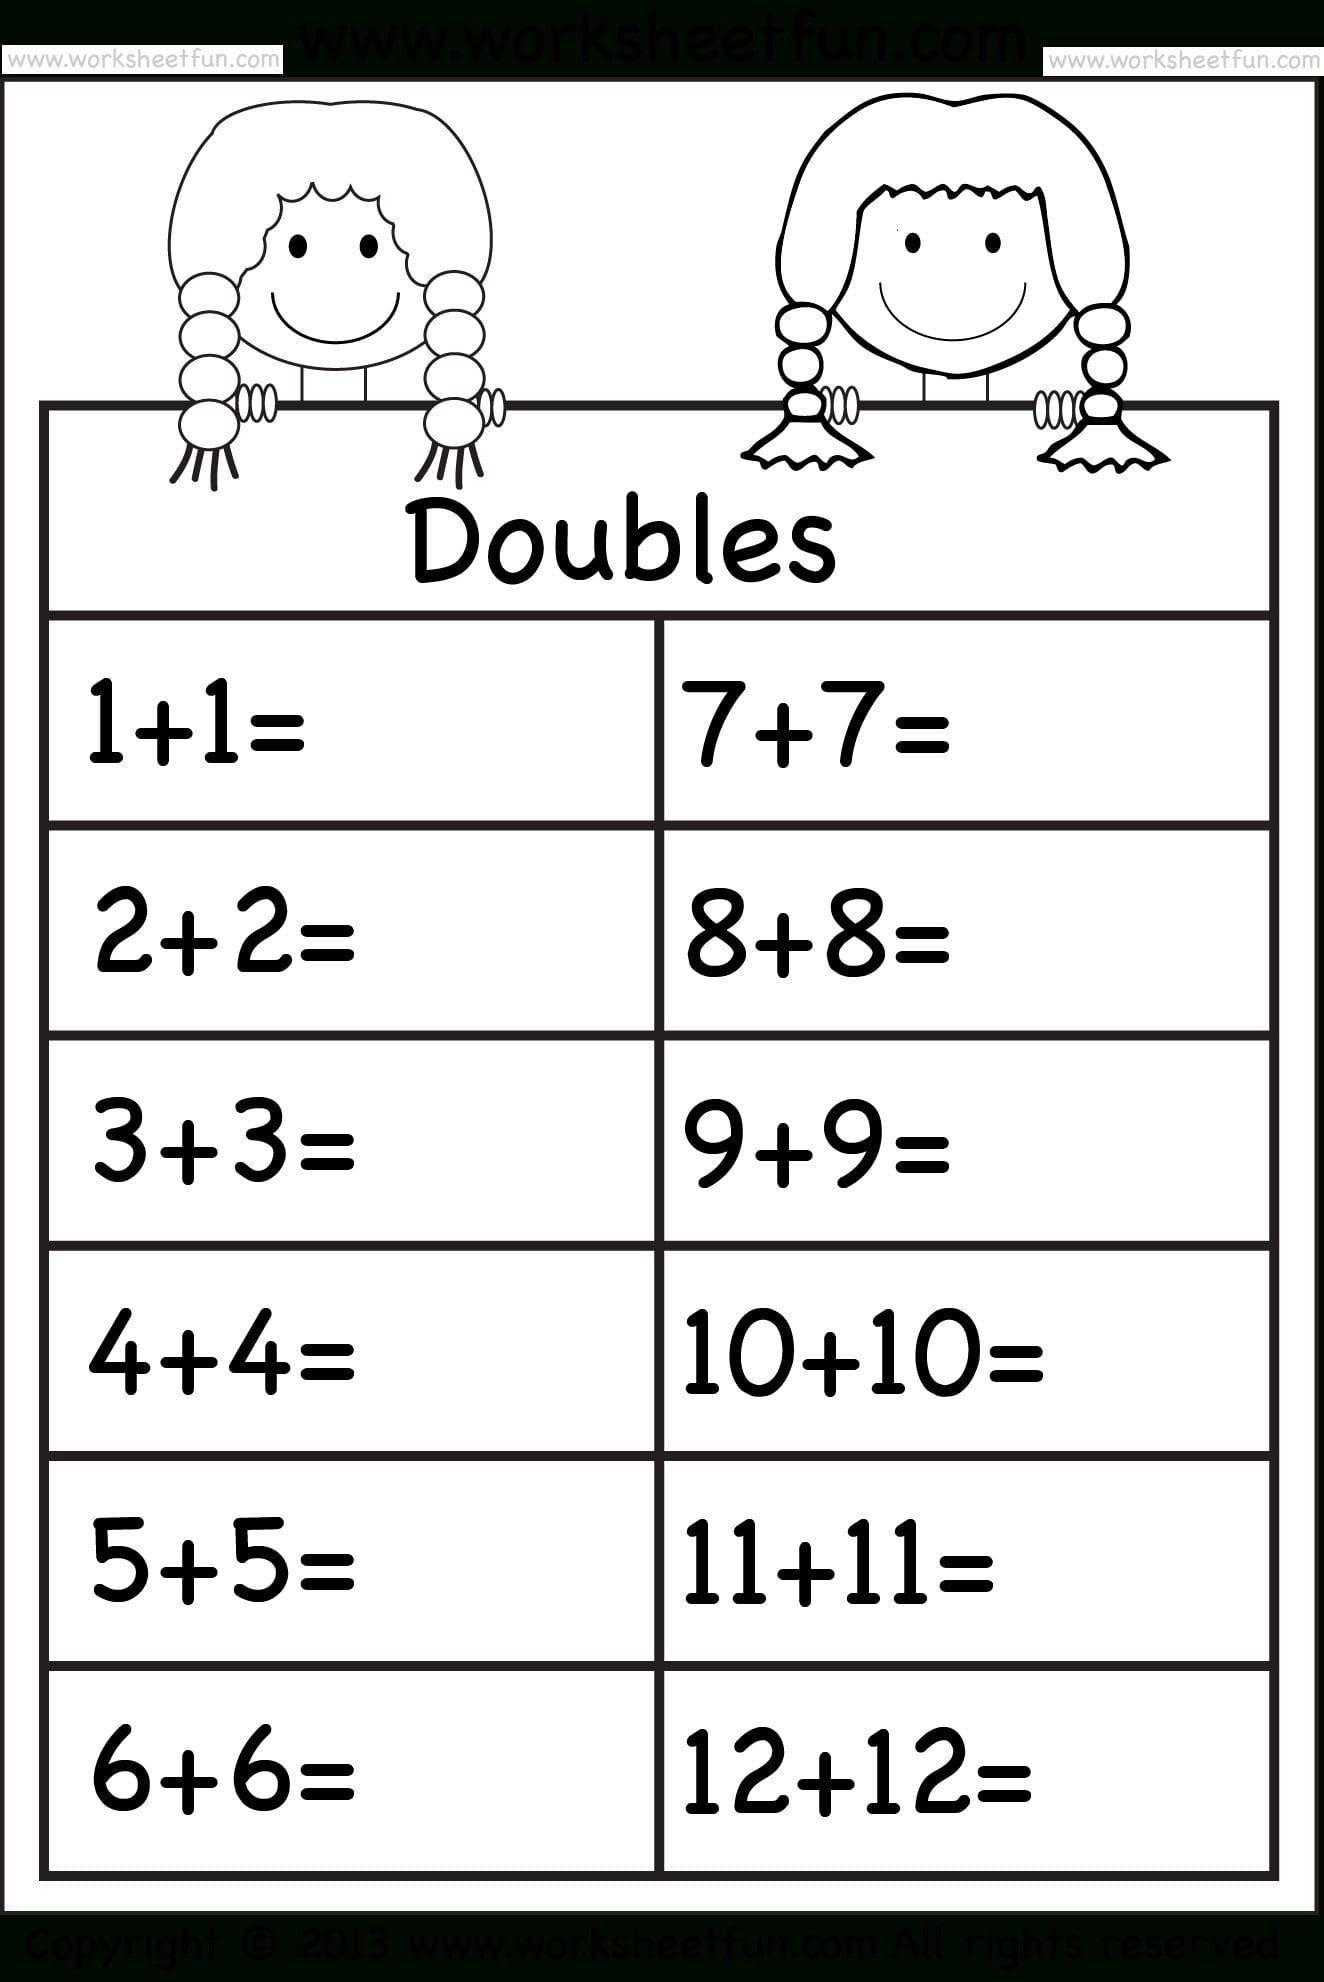 Addition Doubles – 1 Worksheet  Free Printable Worksheets As Well As Adding Doubles Worksheets